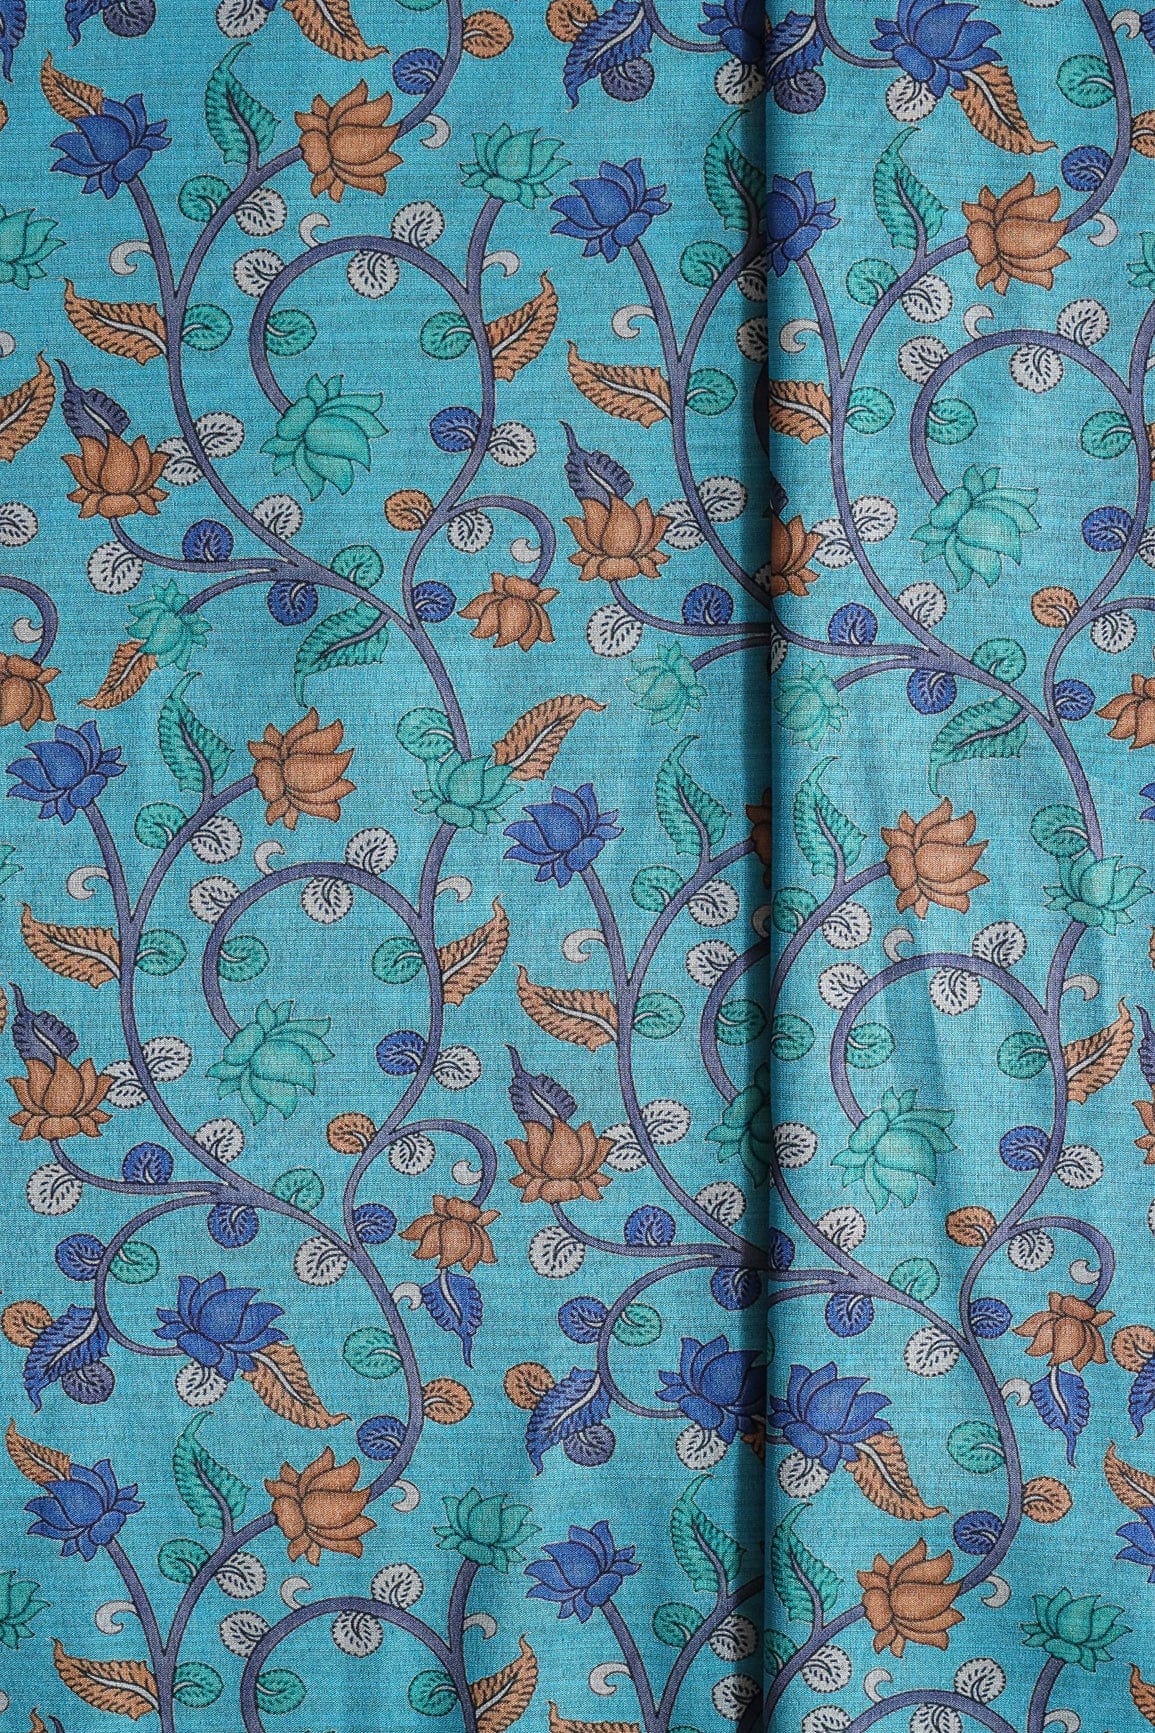 doeraa Prints Brown And Blue Color Floral Pattern Digital Print On Cerulean Blue Mulberry Silk Fabric